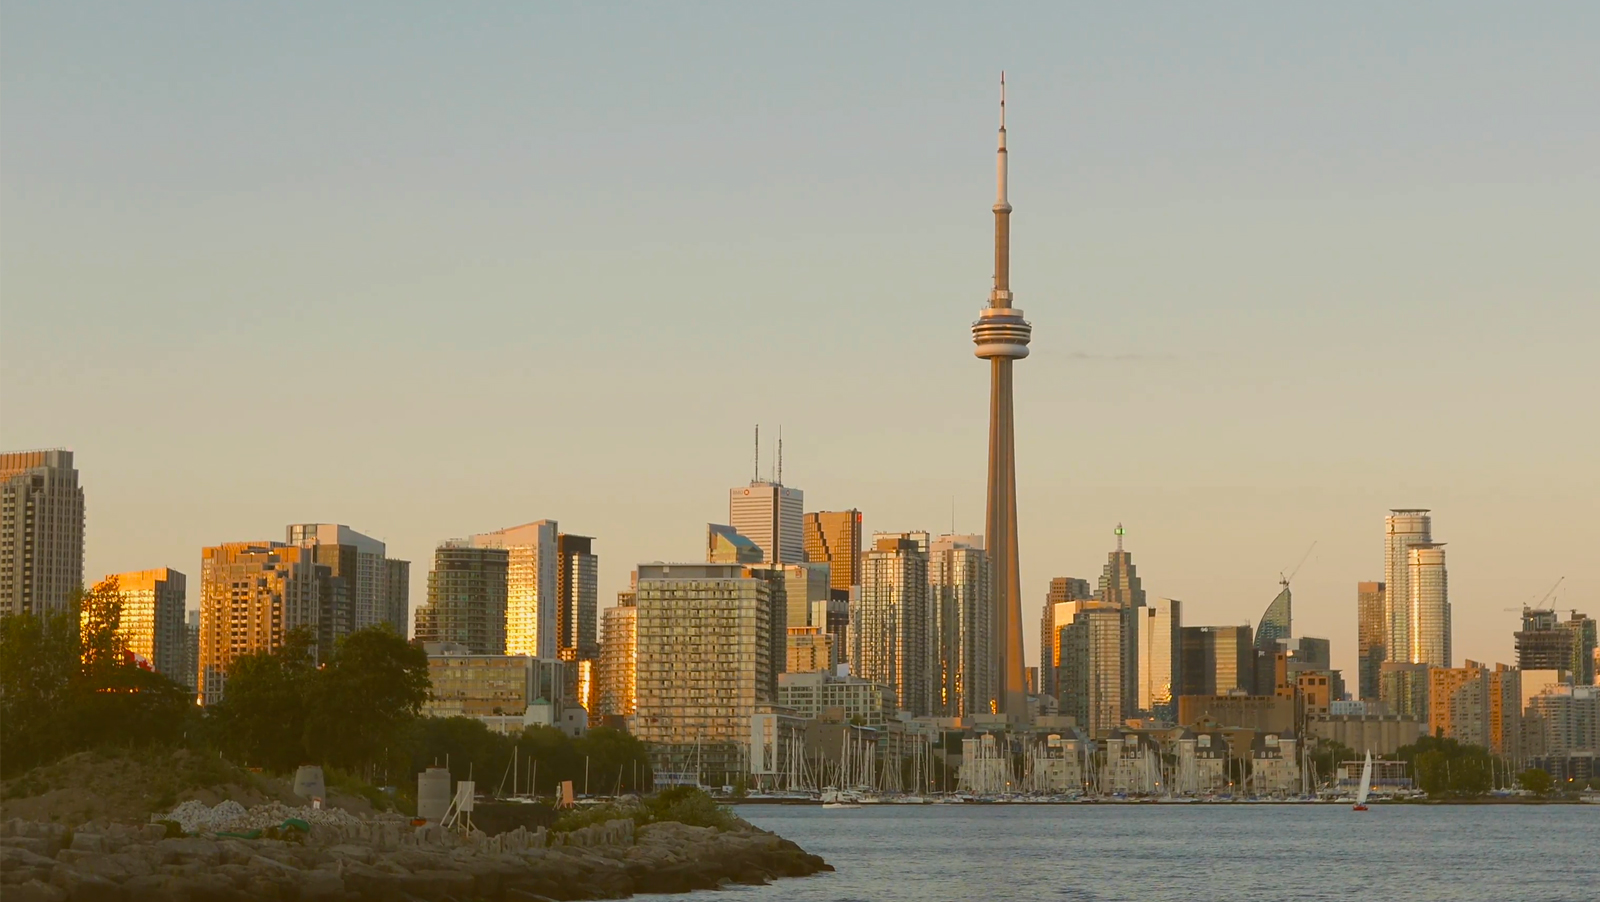 Becky’s Affiliated: Top 5 reasons why iGaming professionals should attend CoinGeek Toronoto